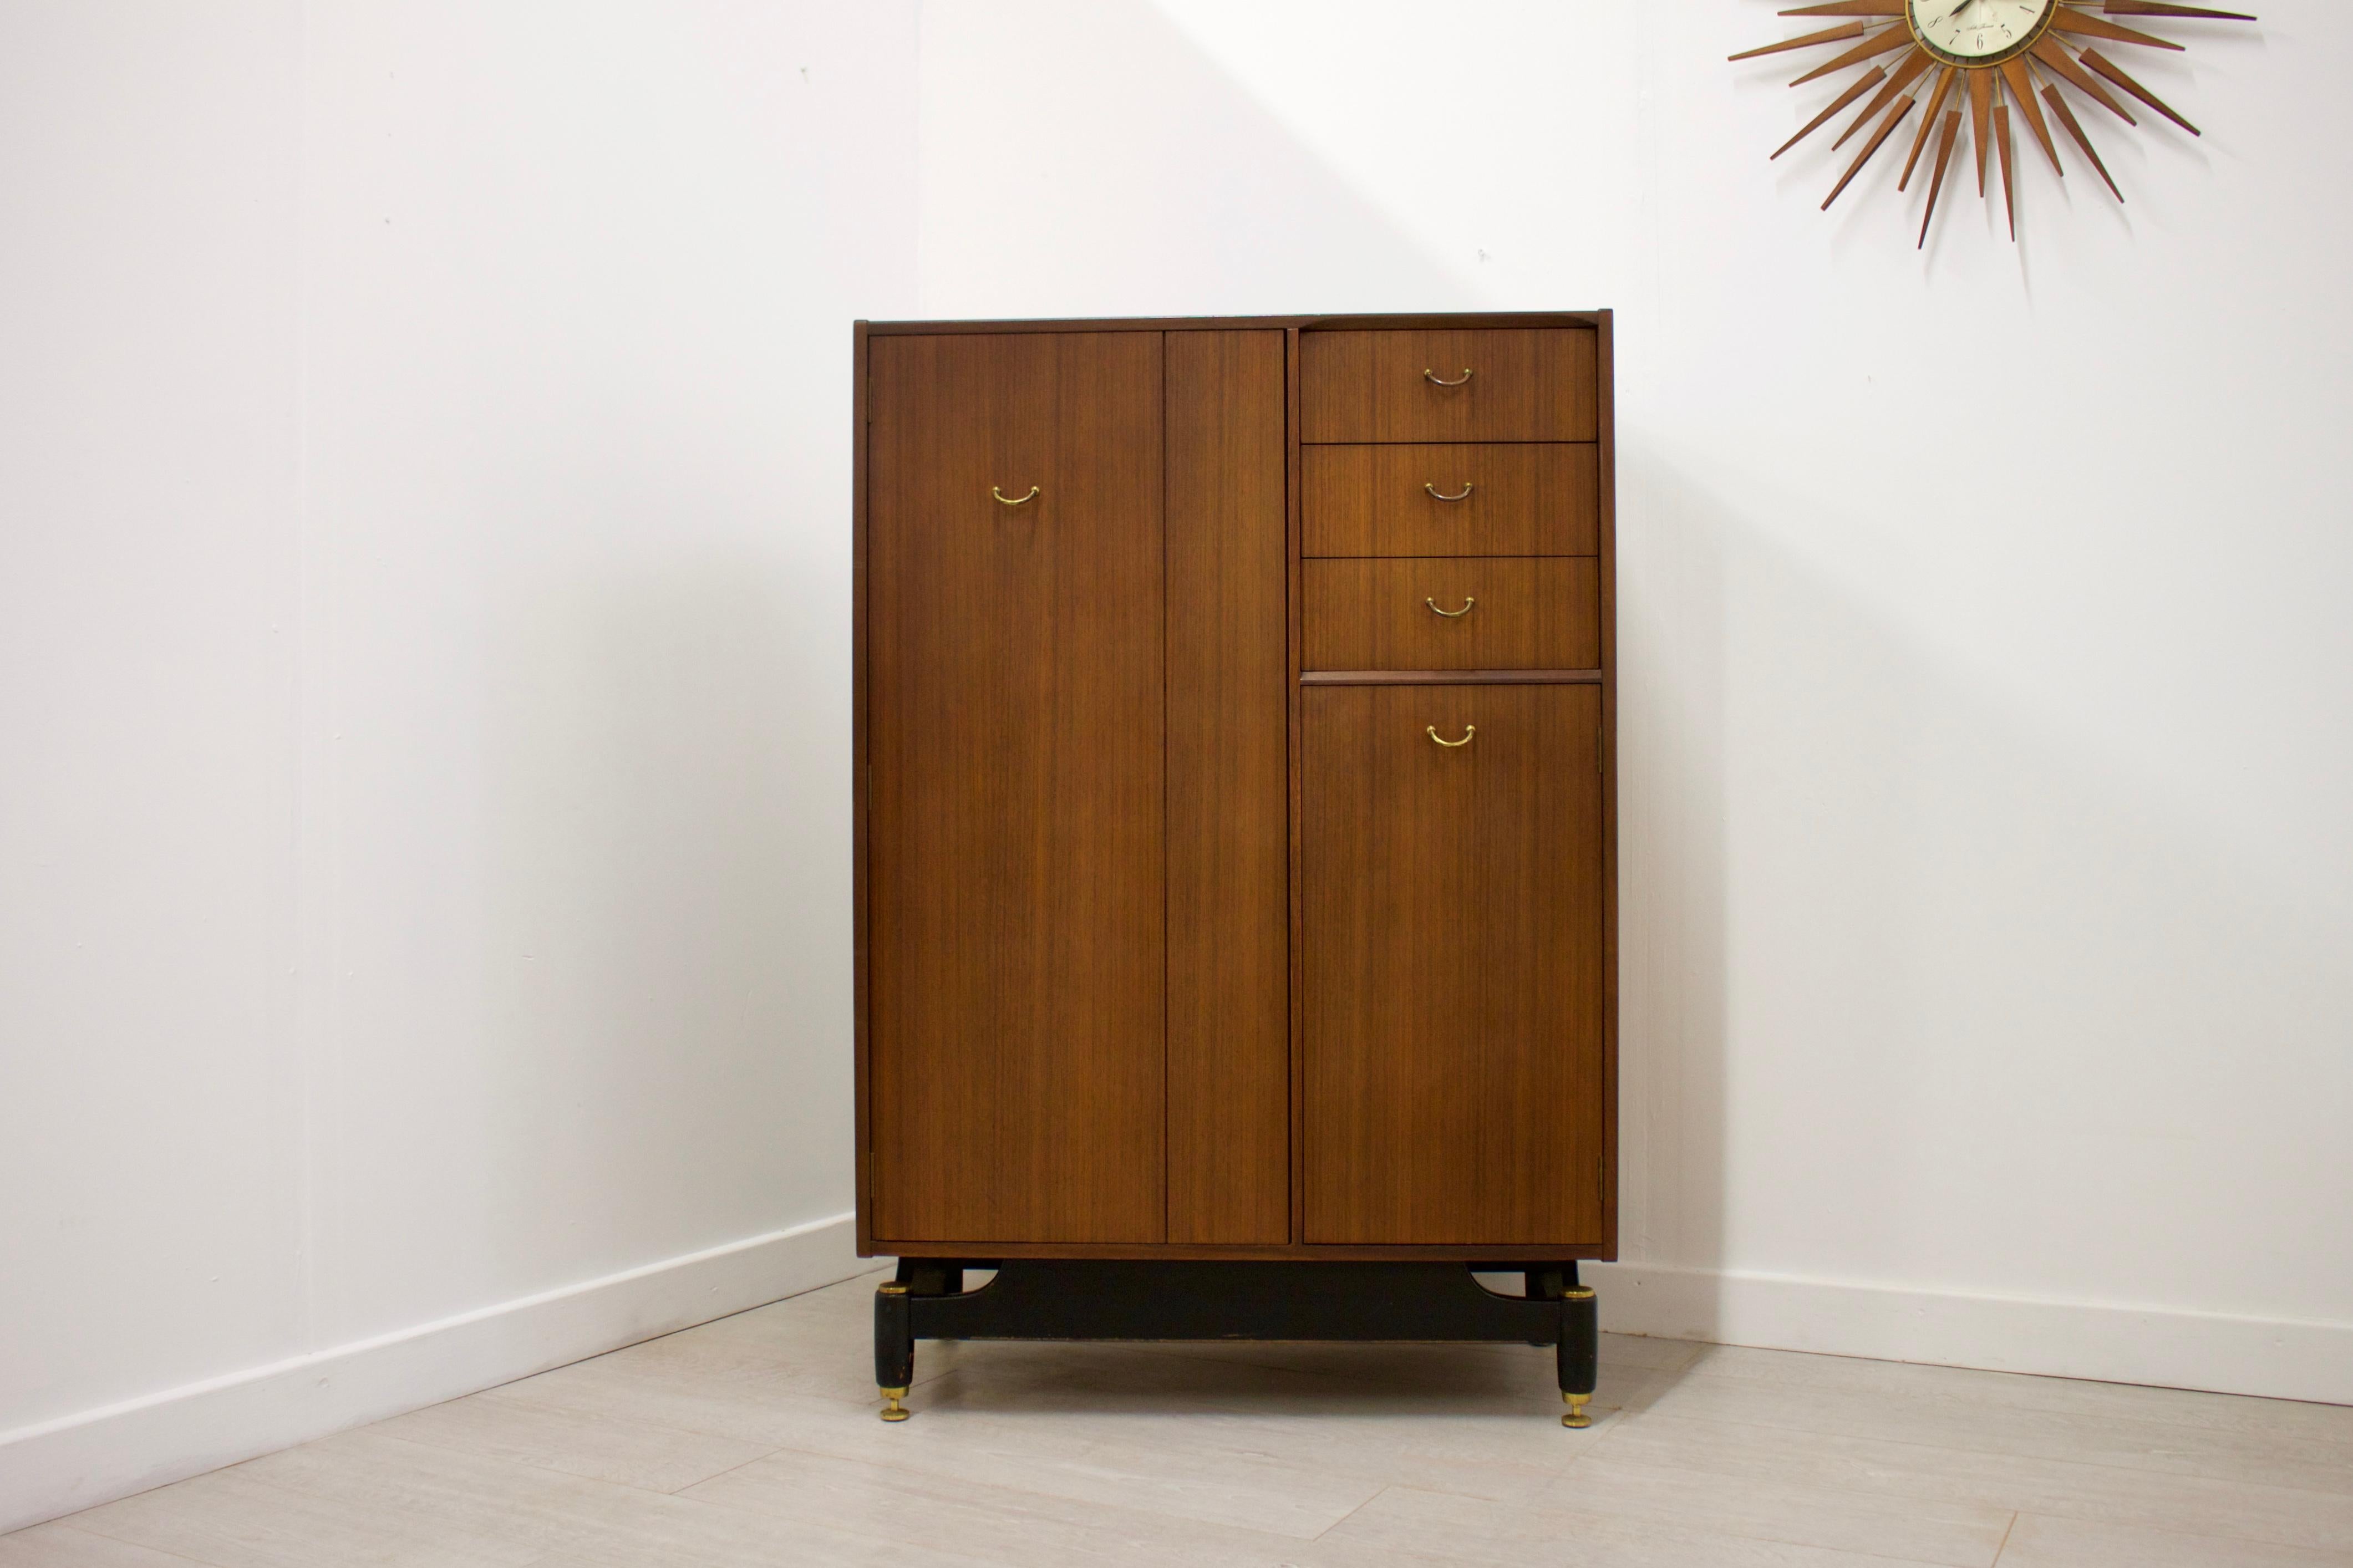 - Mid-Century Modern wardrobe
- Manufactured by G-Plan
- Made from Afromosia
- Features a pull-out hanging rail inside the left cupboard, 2 shelves in the bottom right cupboard and 3 drawers.
- The top drawer includes a pop-up mirror and is